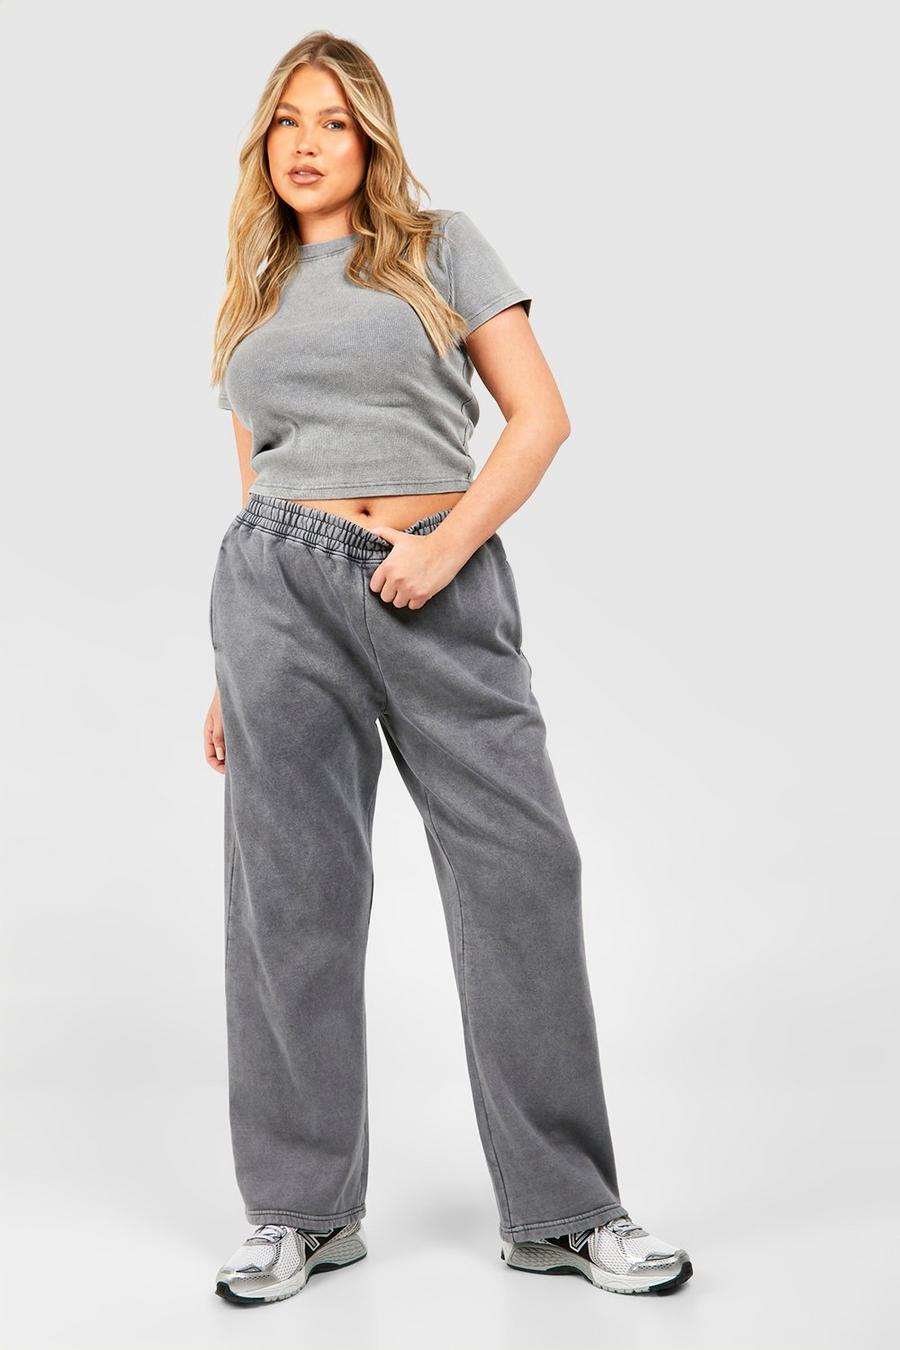 Charcoal grey Plus Washed Straight Leg Jogger 